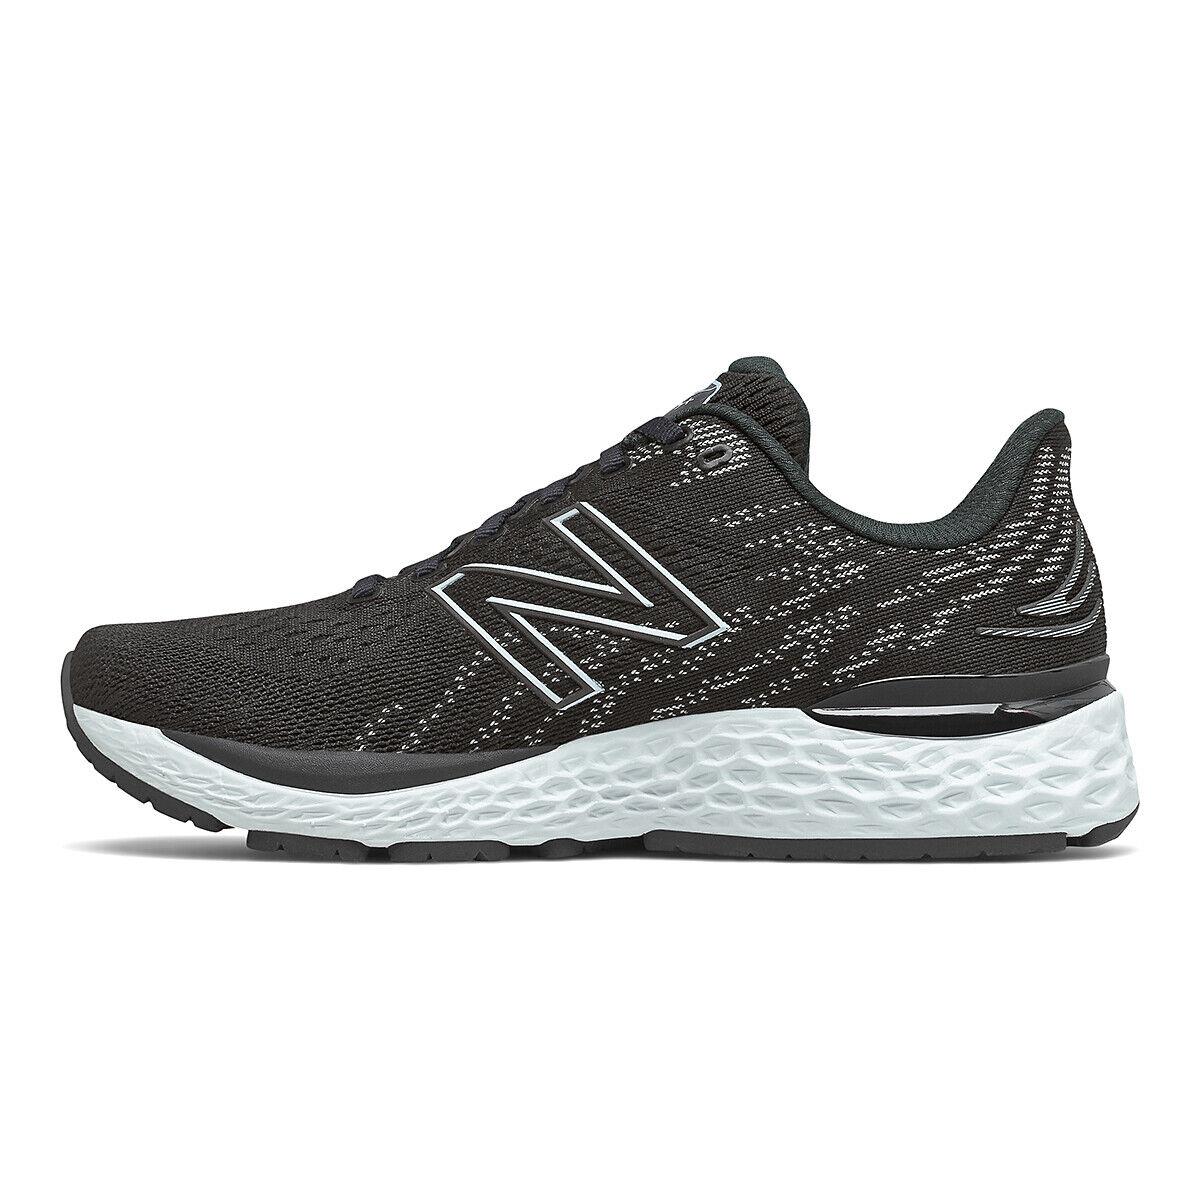 New Balance shoes  - Black , White with black and phantom Manufacturer 0